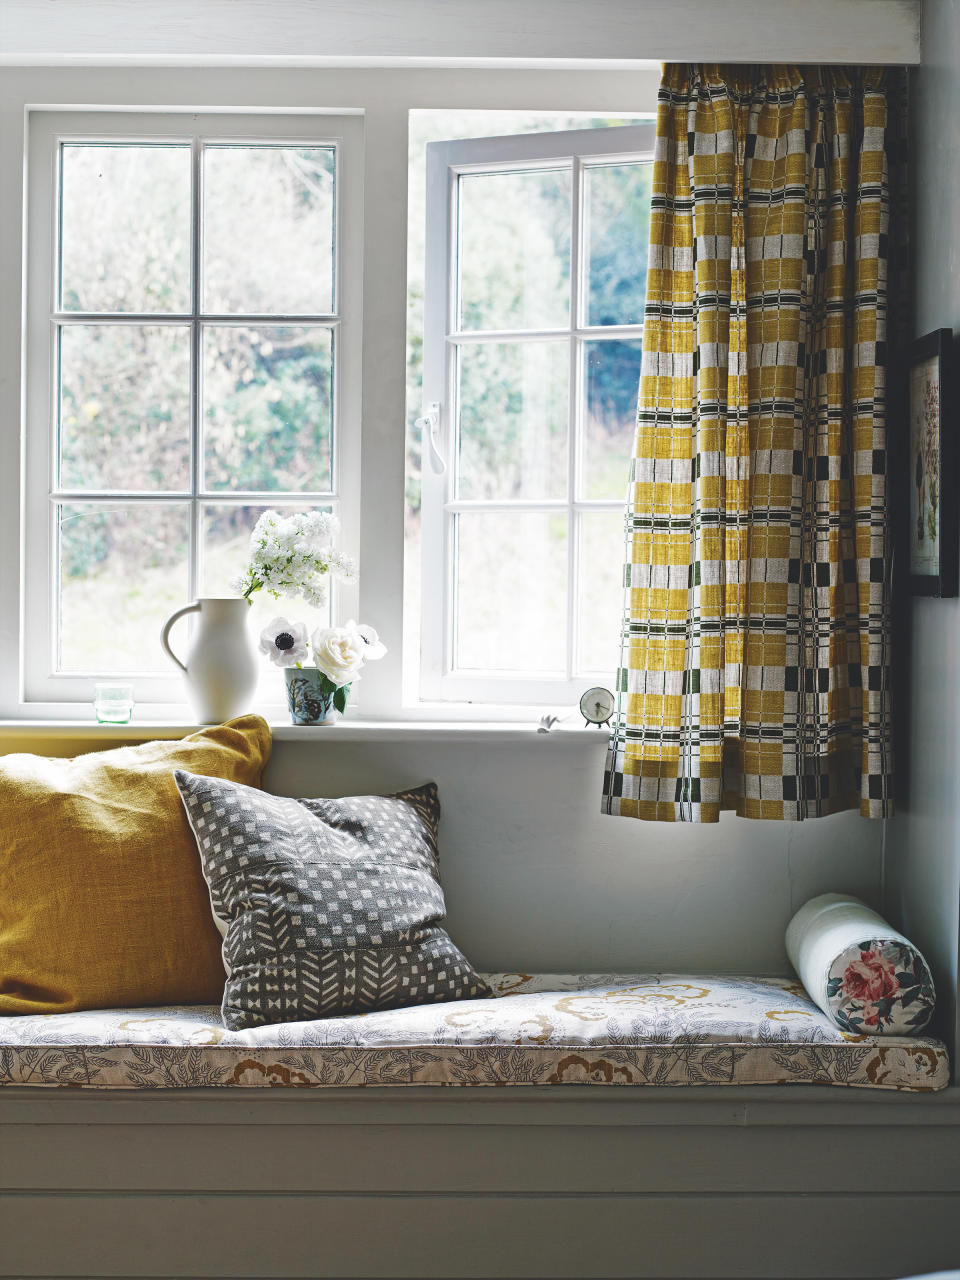 <p> The thick walls of many older country properties create a natural inset at the window, creating the perfect spot to build in seating. </p> <p> A built-in window seat will create a seamless look and gives the opportunity to add storage beneath a lift-up lid. Add a made-to-measure seat pad for comfort. </p> <p> If you don&apos;t want to add a built-in window seat, you can use an ottoman or blanket box to fill the space to create a similar effect. <a href="https://www.homesandgardens.com/ideas/window-seat-ideas" rel="nofollow noopener" target="_blank" data-ylk="slk:Window seat ideas" class="link ">Window seat ideas</a>&#xA0;has tips from interior designers on how to make the most of this feature in your country-style home.&#xA0; </p>